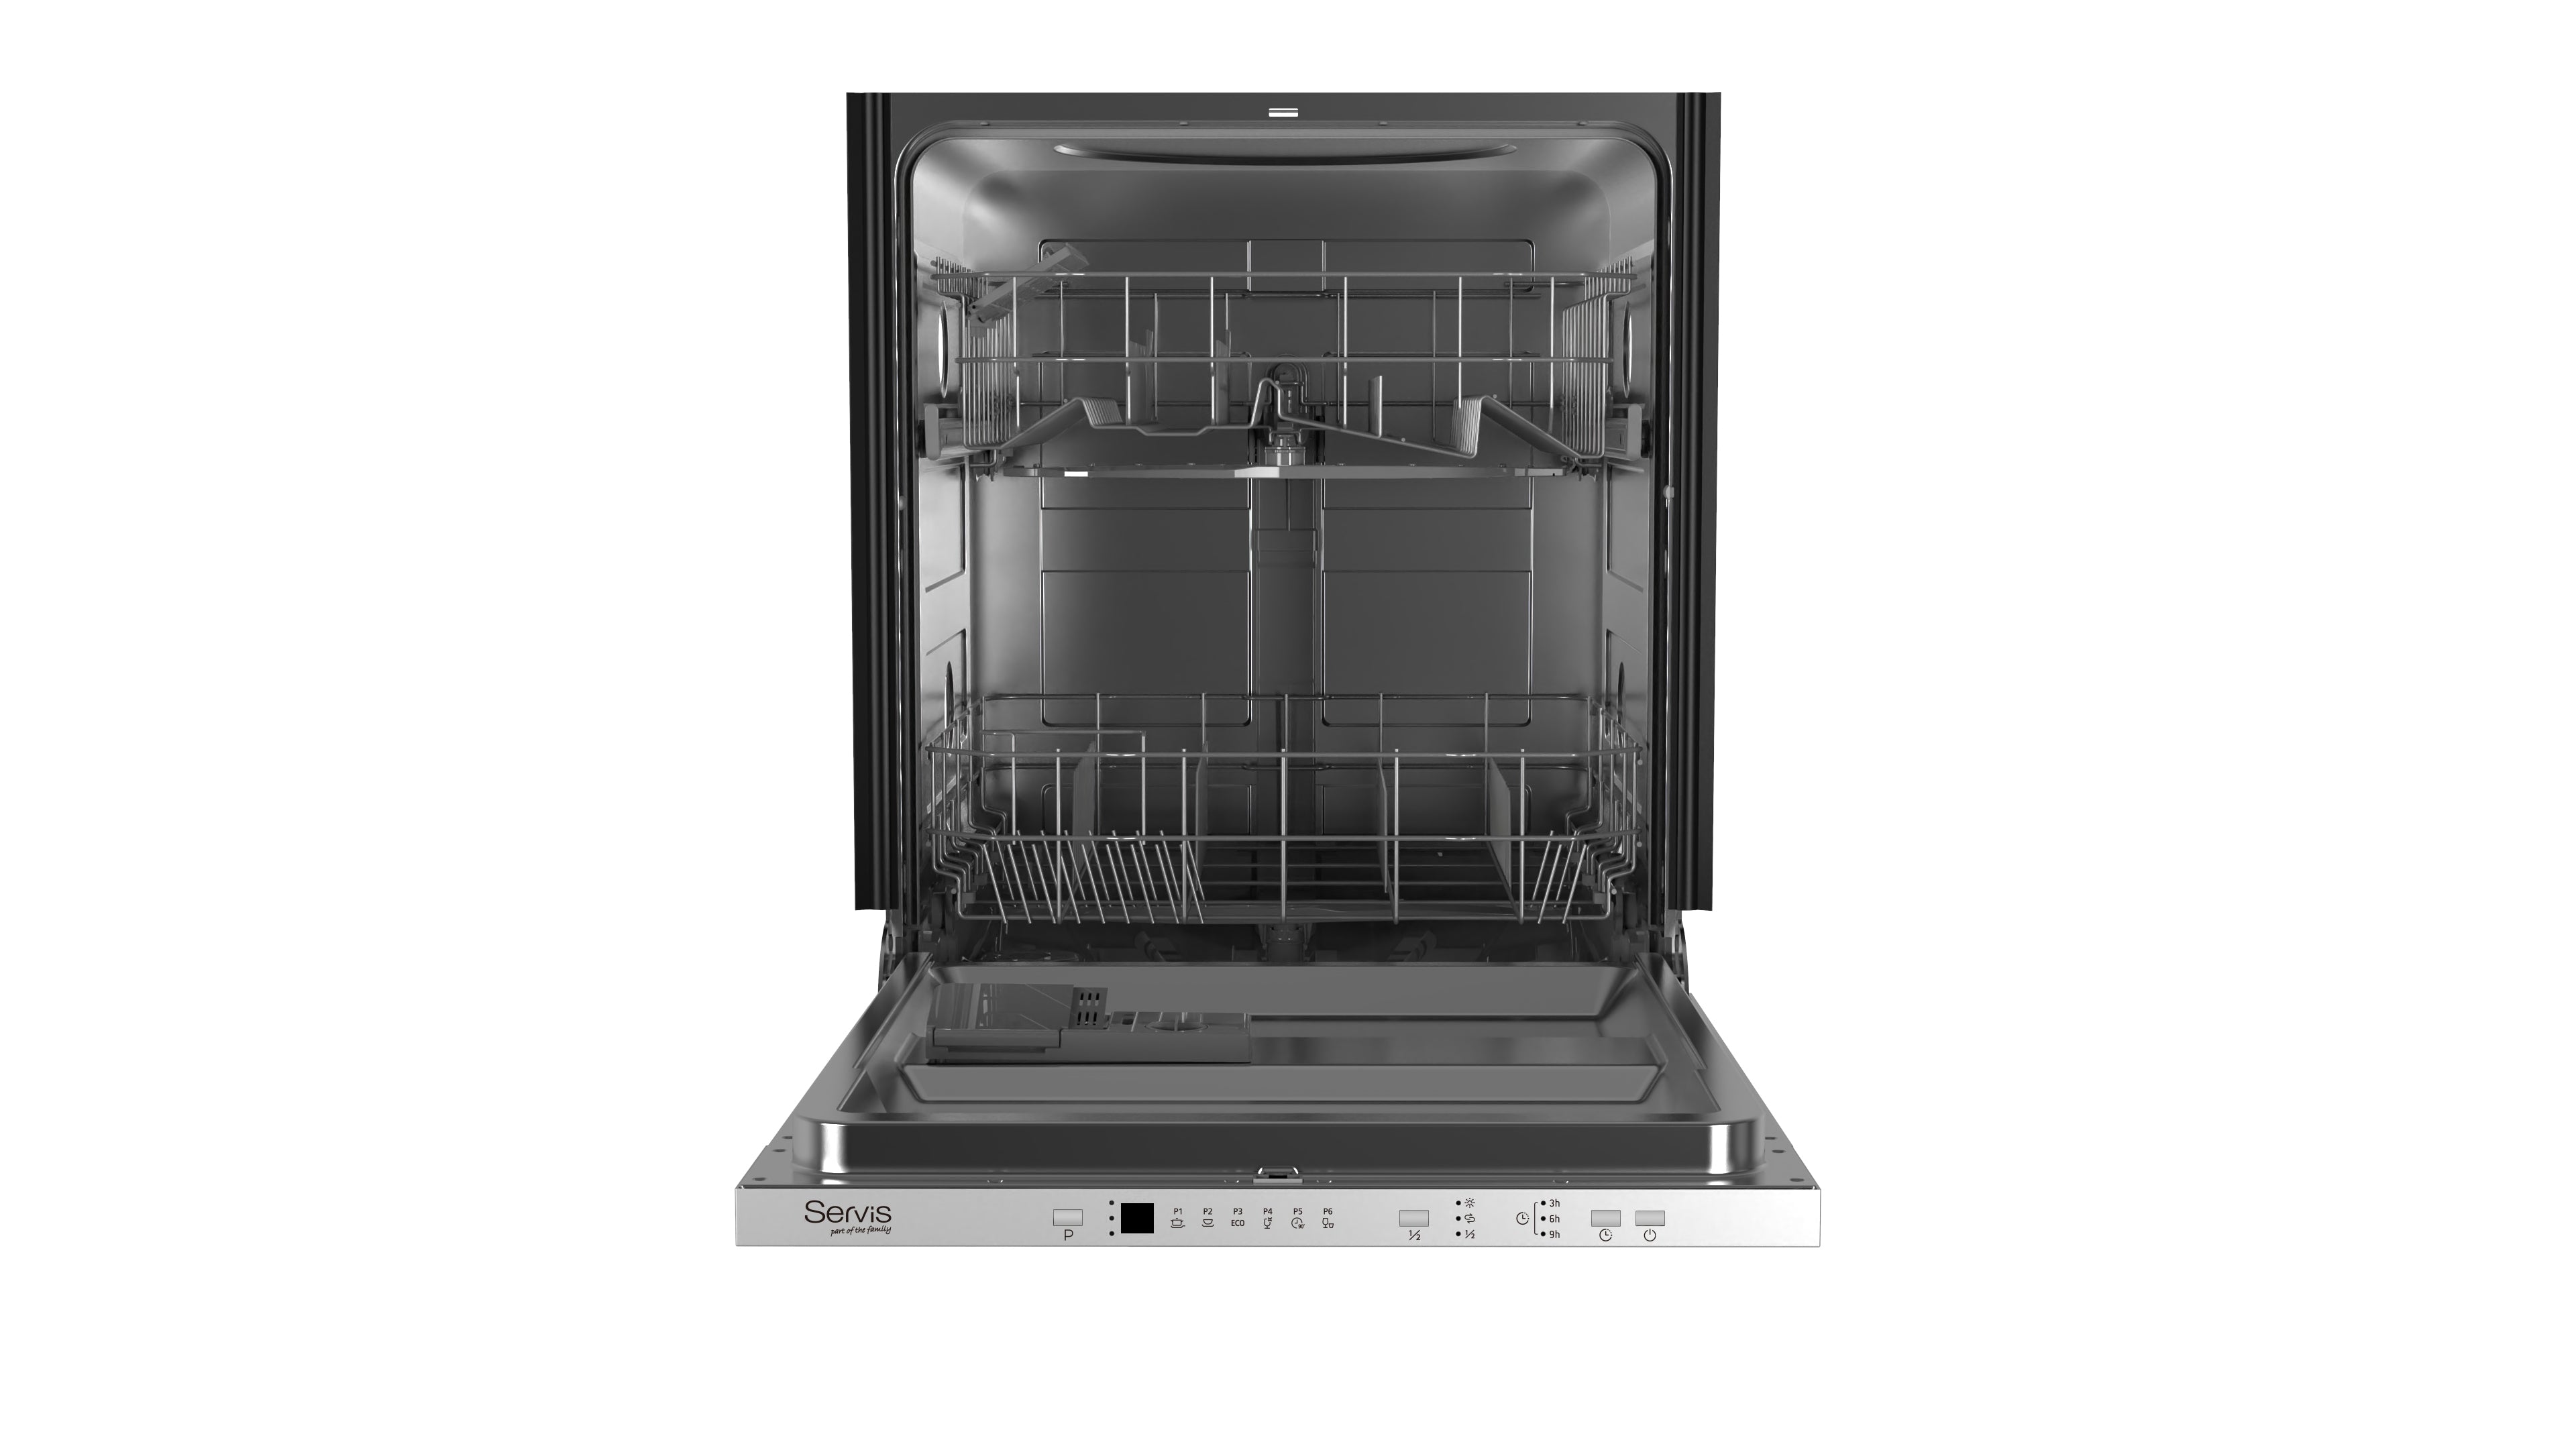 S3612M2INT SERVIS 12 PLACE INT DISH WASHER